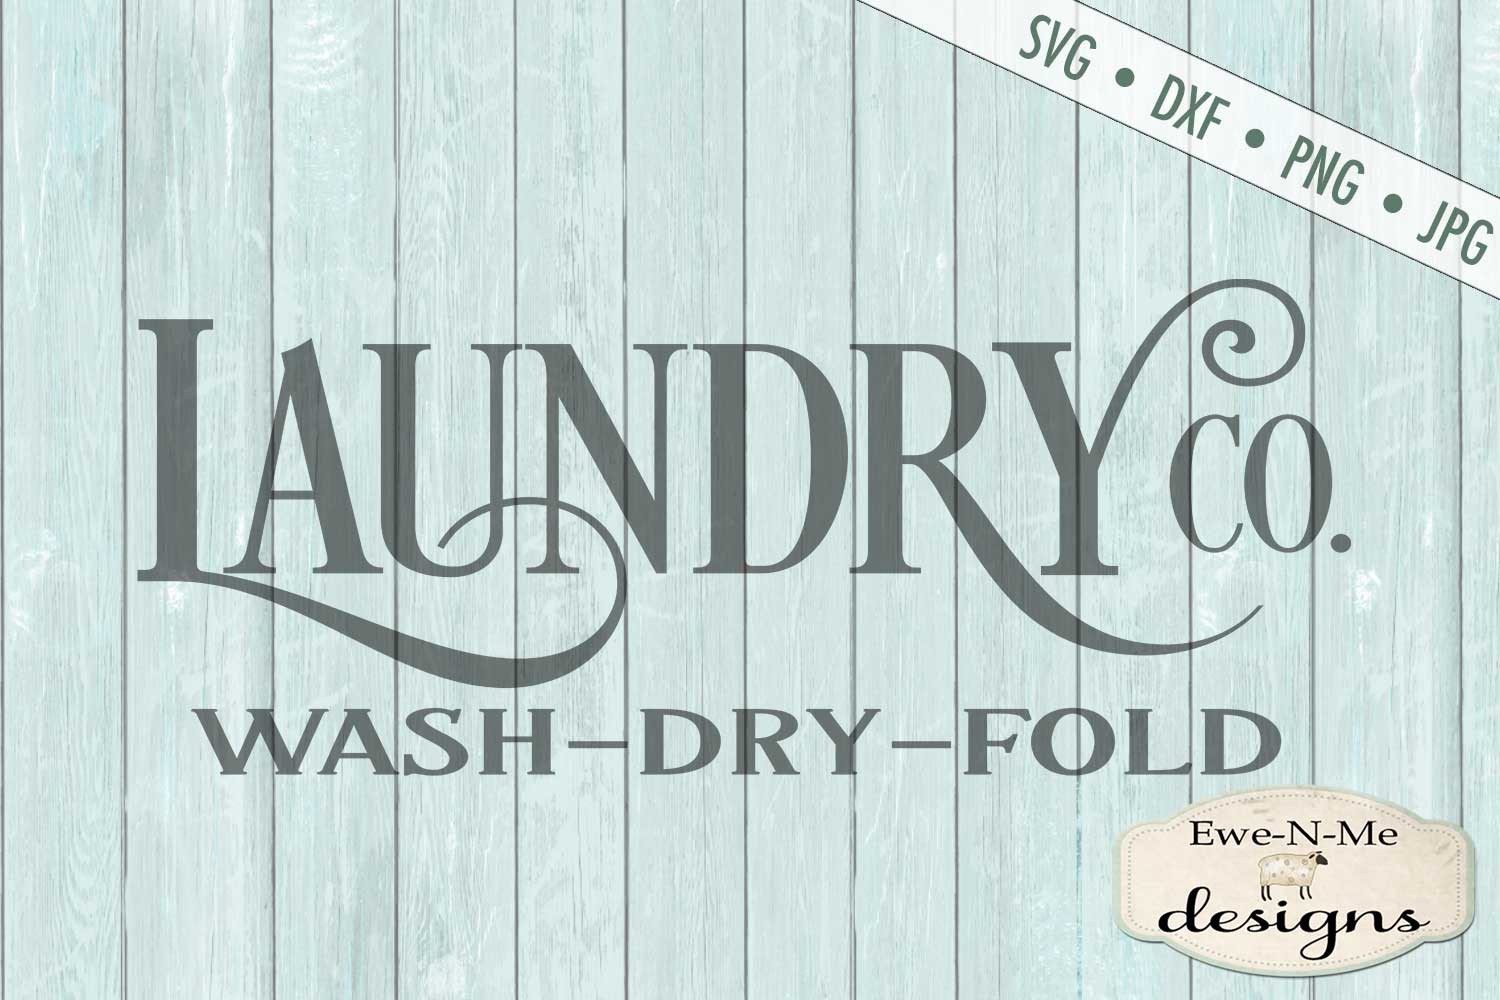 Laundry Co - Laundry Room - Wash Dry Fold - SVG DXF Cut File